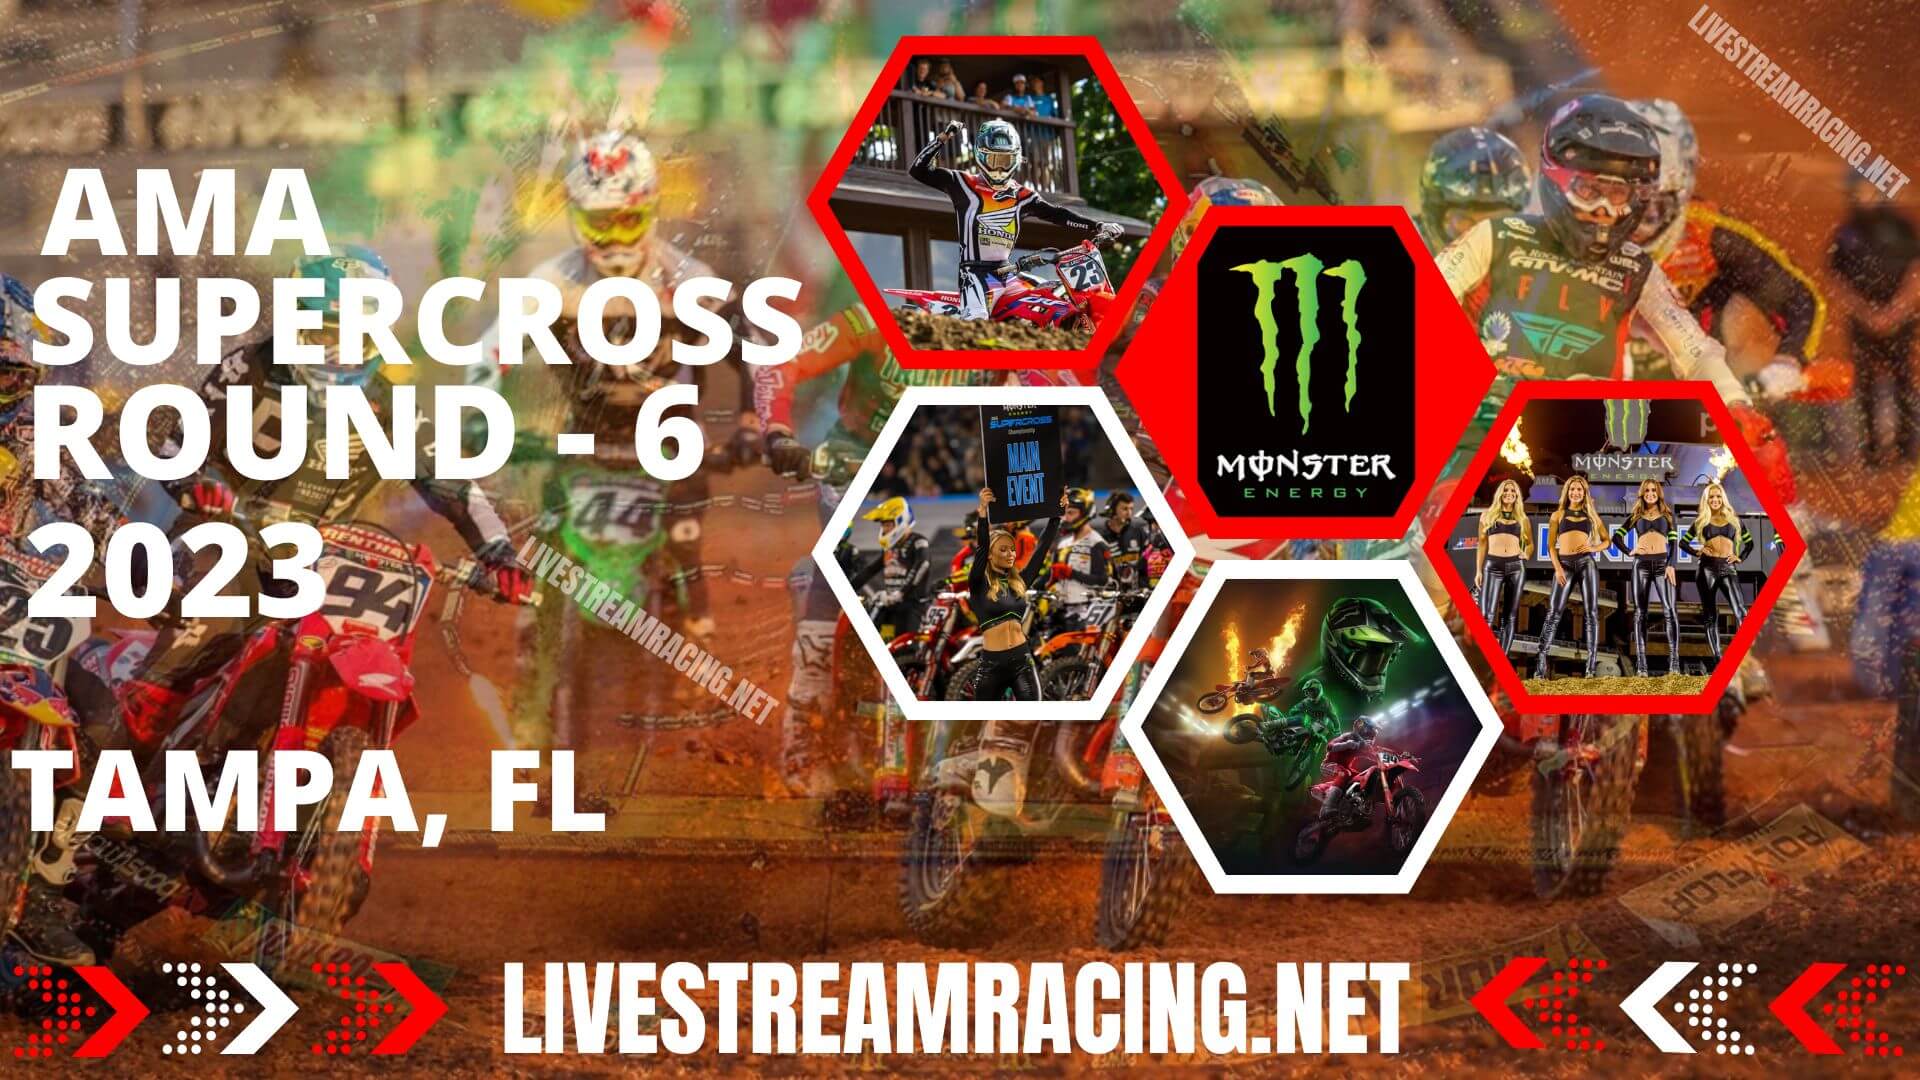 ama-supercross-tampa-live-streaming